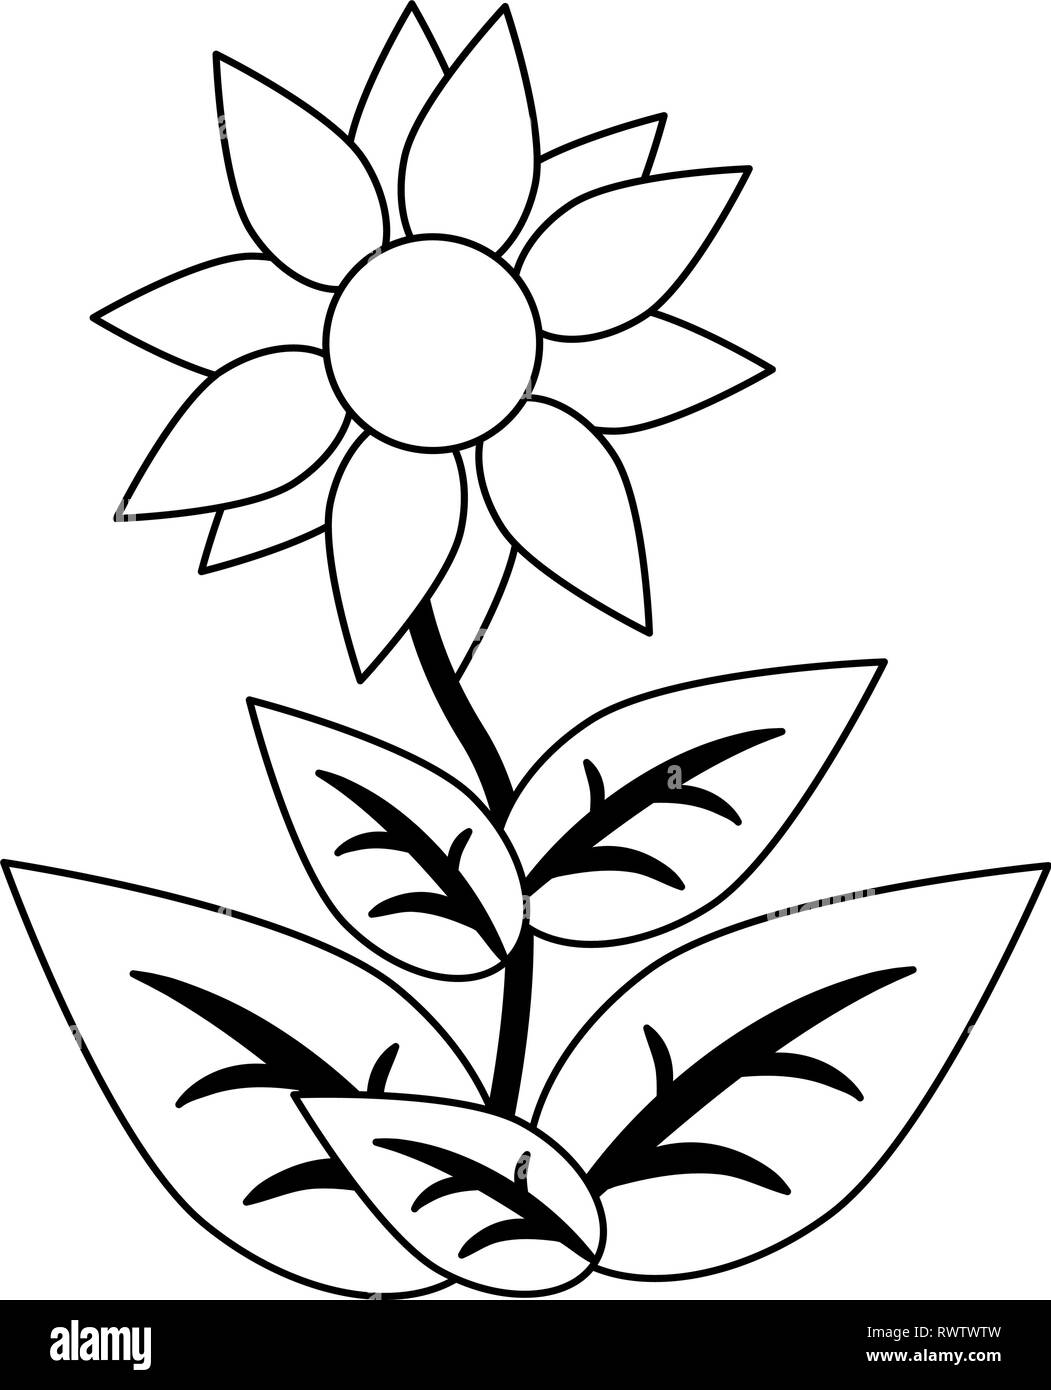 sunflower with leaves isolated in black and white Stock Vector